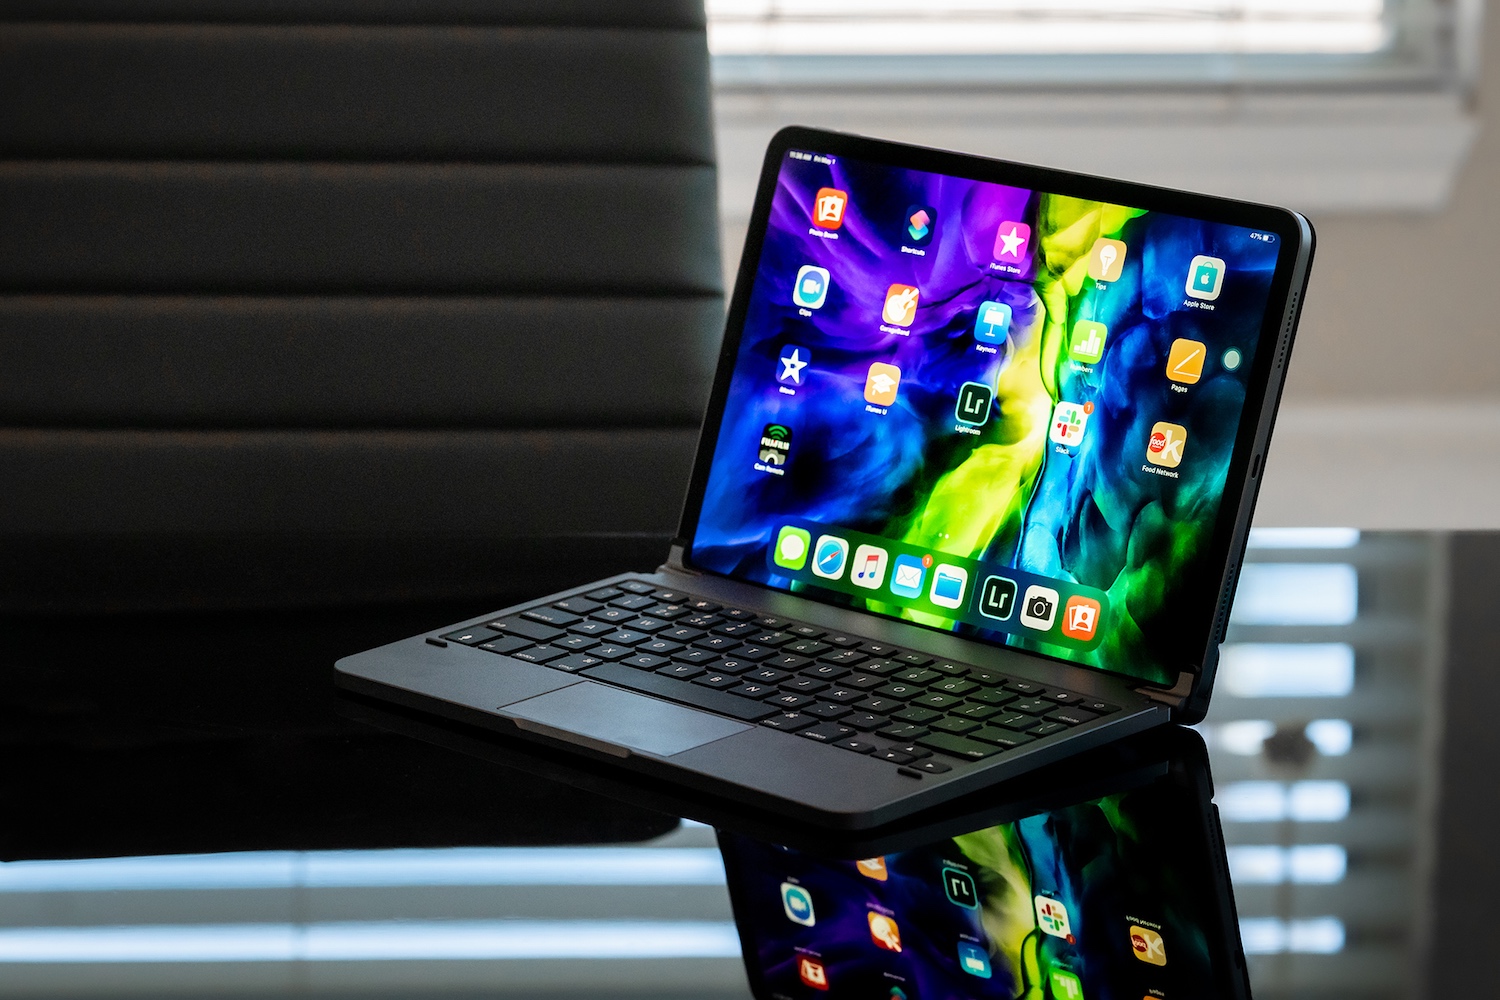 Comparing The New iPad Pro 12.9 And Magic Keyboard To The 2018